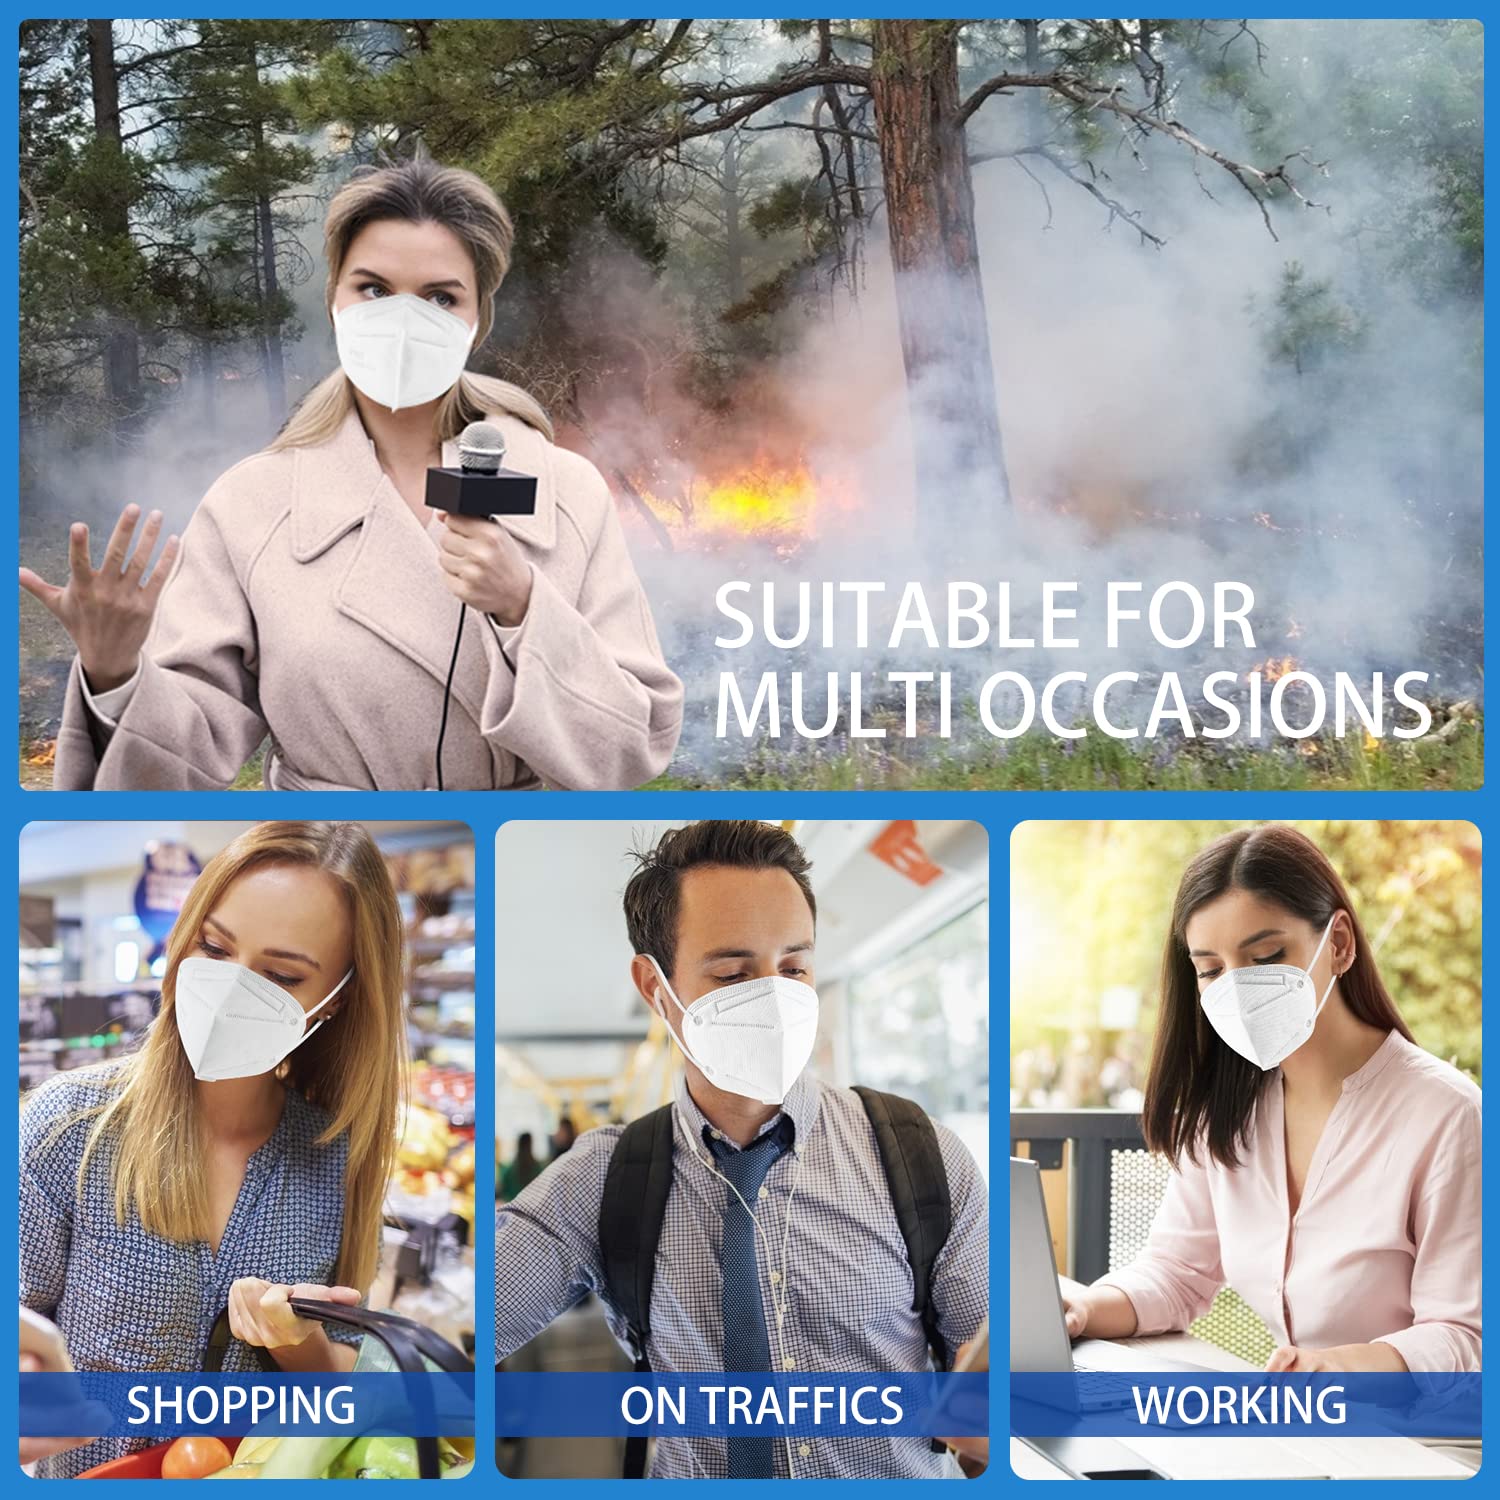 Hotodeal KN95 Face Mask 20 PCS,5 Layers Cup Dust Mask Against PM2.5 from Fire Smoke, Dust, for Men, Women, Essential Workers(White)